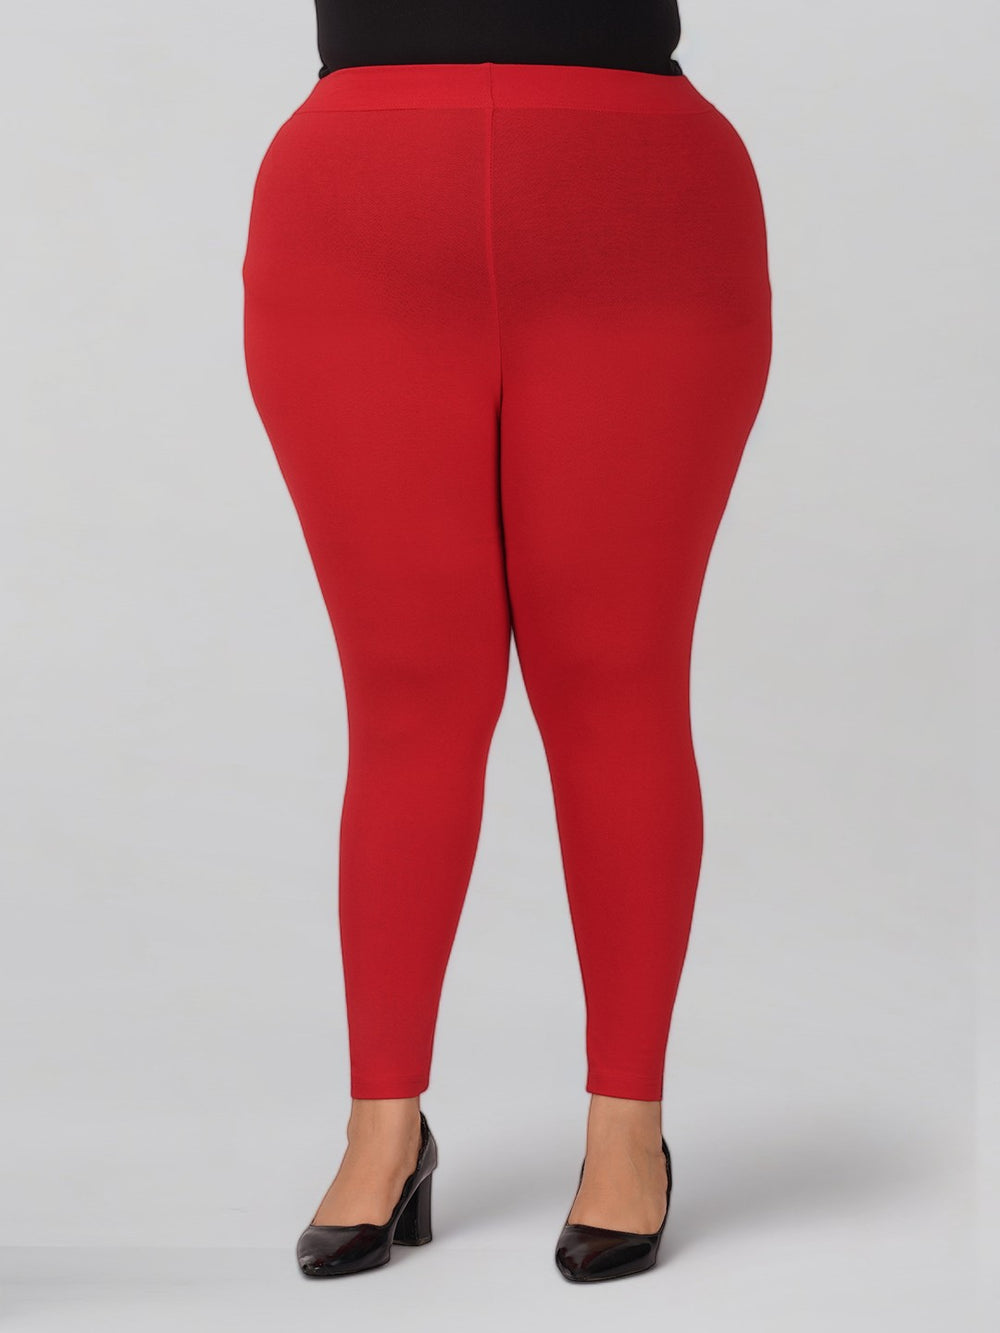 Red Plus Size Cotton AnkleLength Leggings